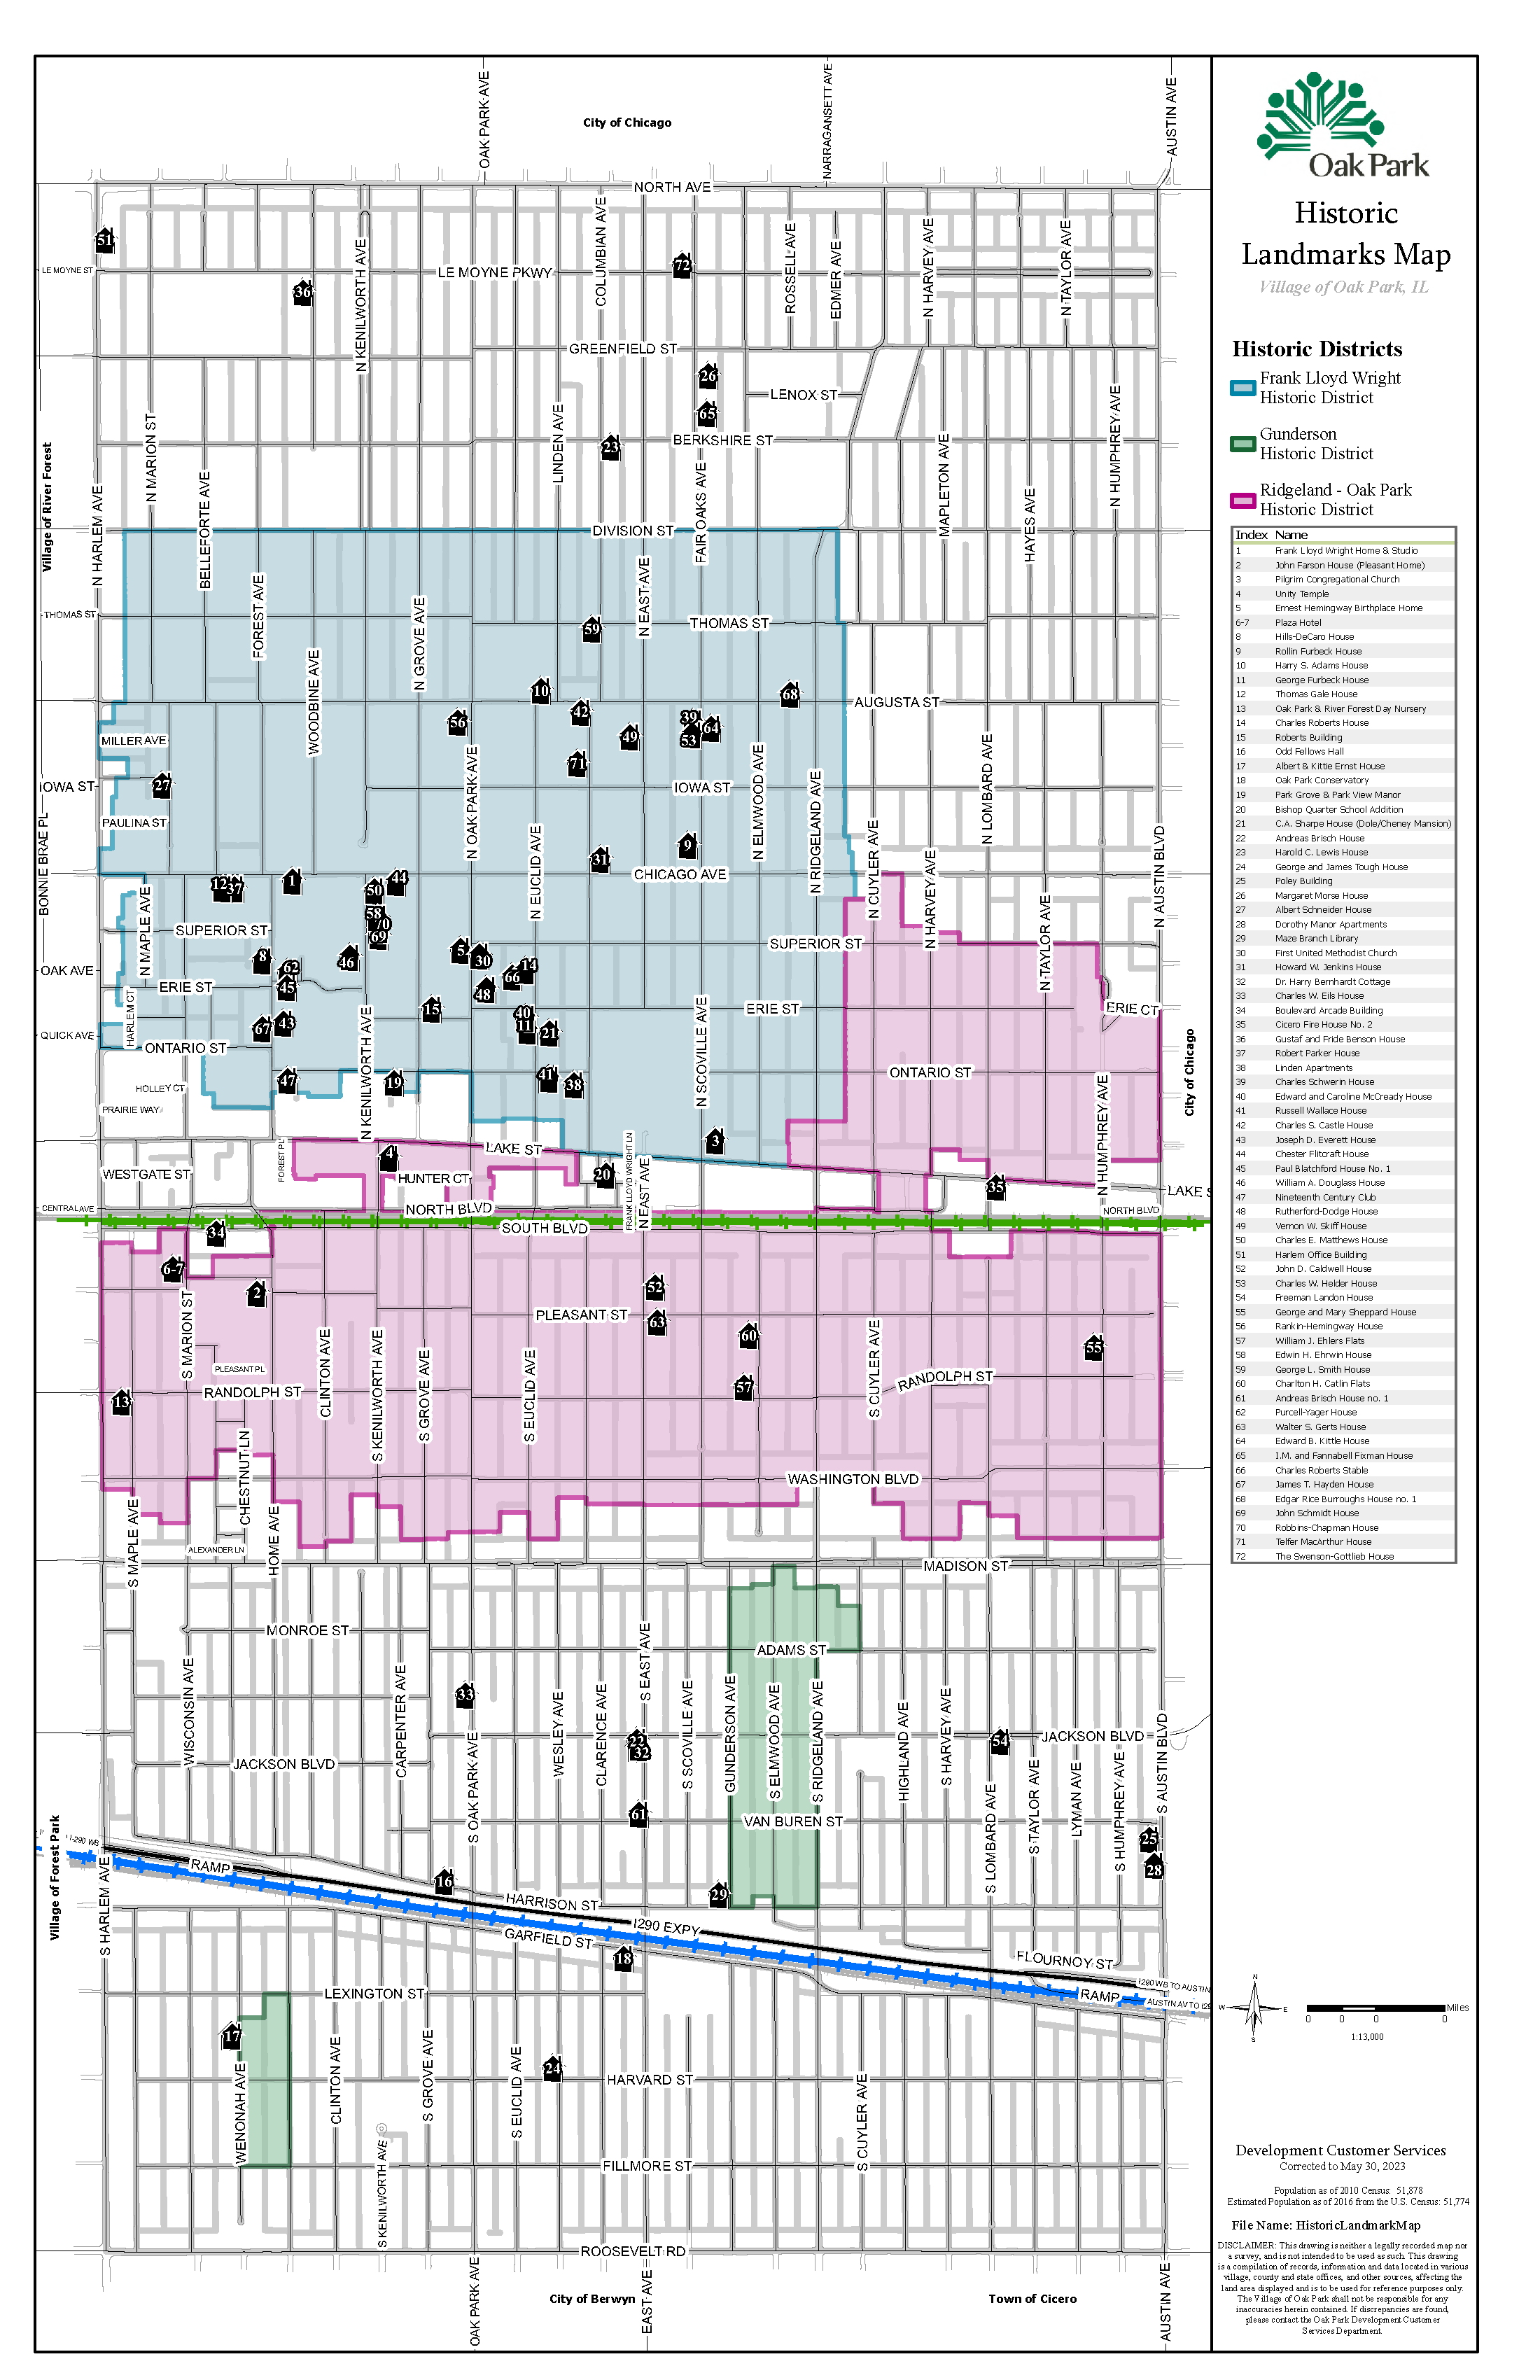 Map showing boundaries of Oak Park's three historic districts